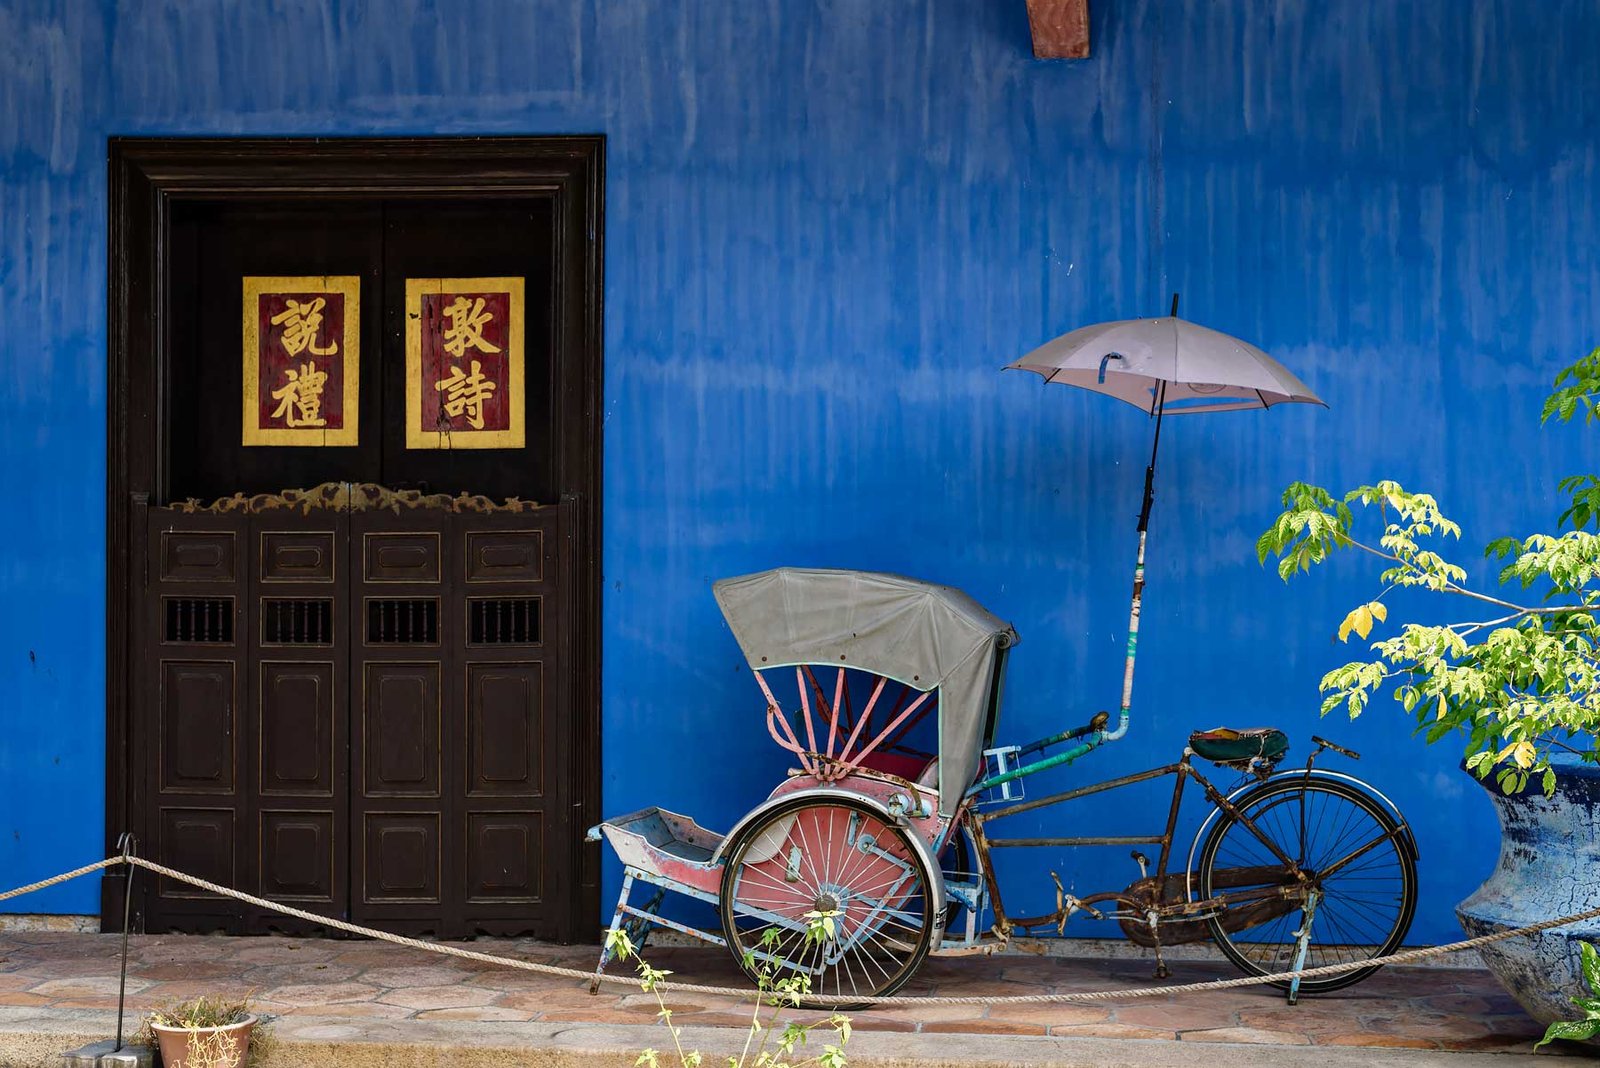 Photos that will make you want to visit Malaysia's Food Capital, George Town in Penang, Malaysia | The Blue Mansion